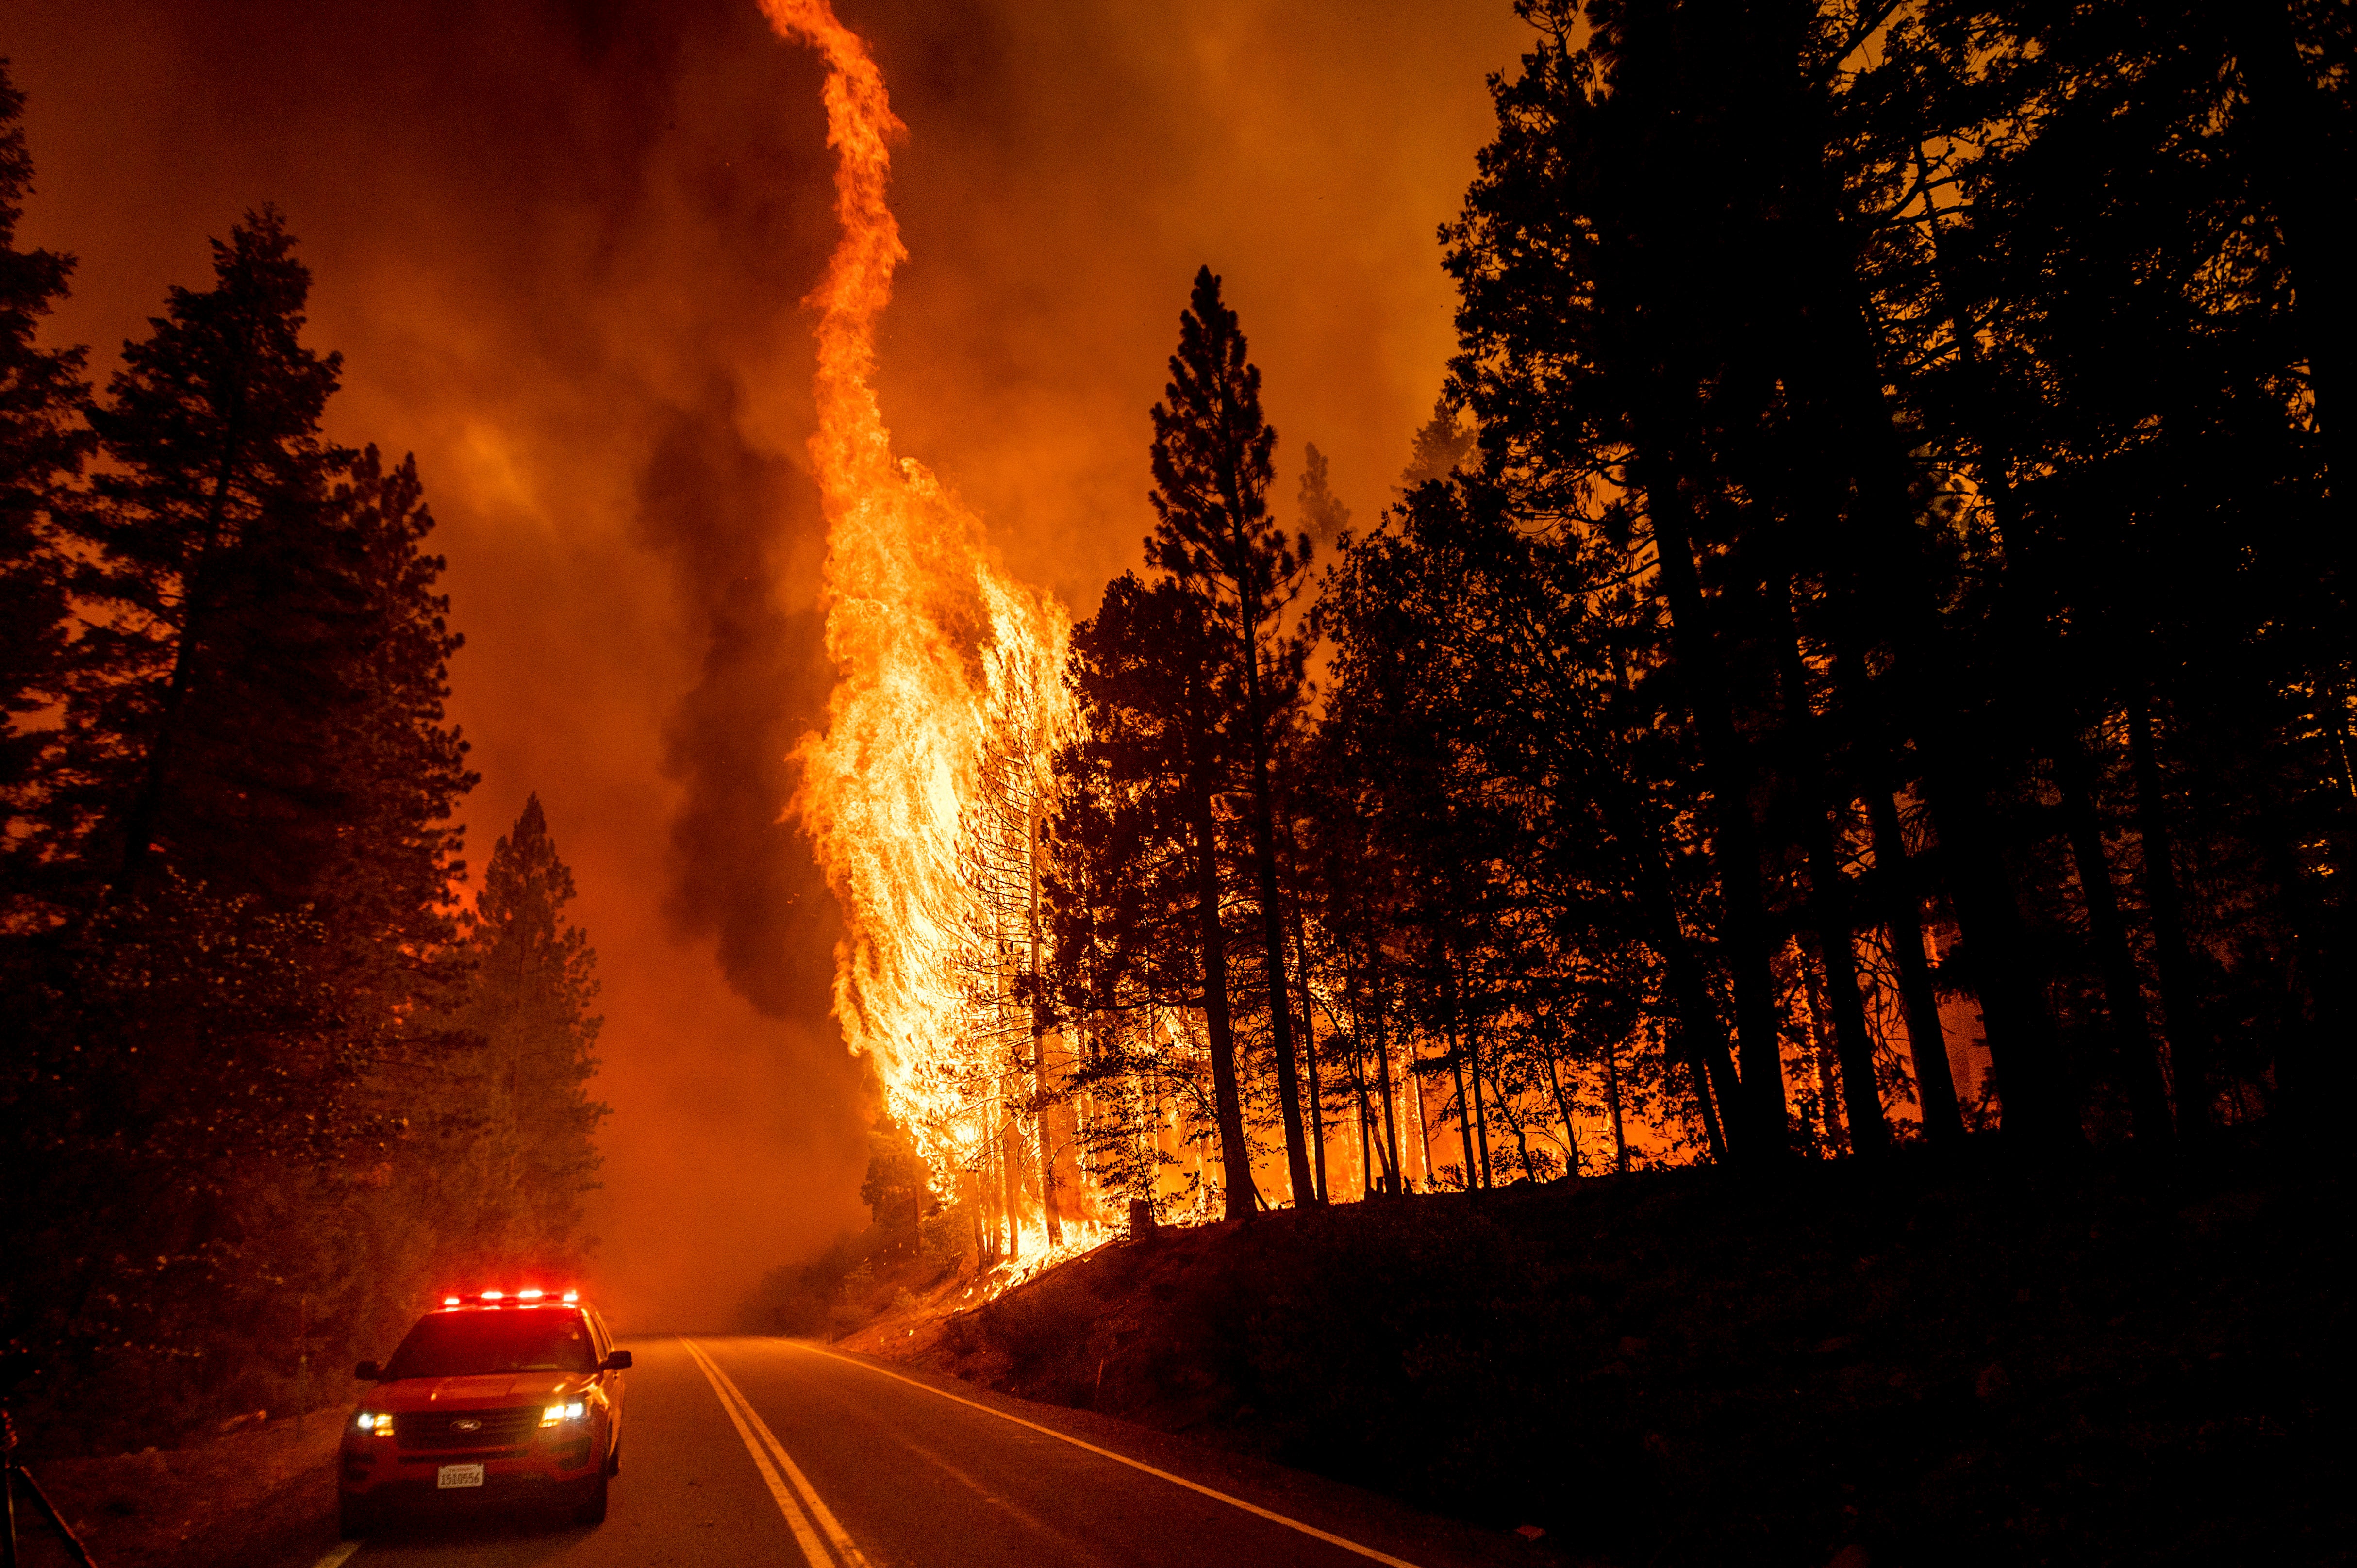 The Dixie Fire jumps Highway 89 in Plumas County, California in August 2021. The wildfire was the first to burn from one side of the Sierra Nevada mountain range to the other